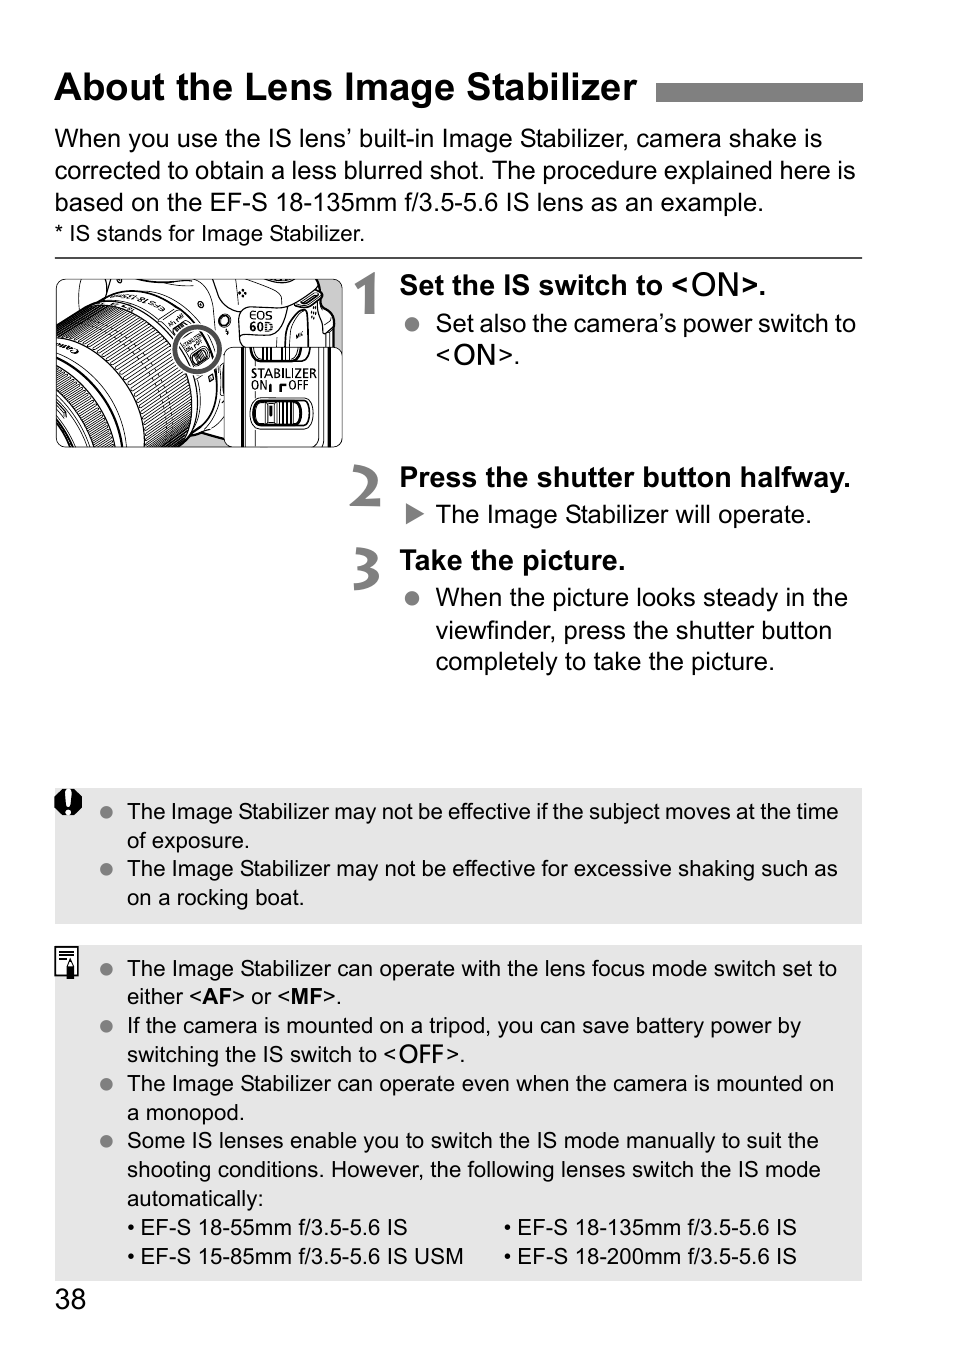 About the lens image stabilizer | Canon EOS 60D User Manual | Page 38 / 320